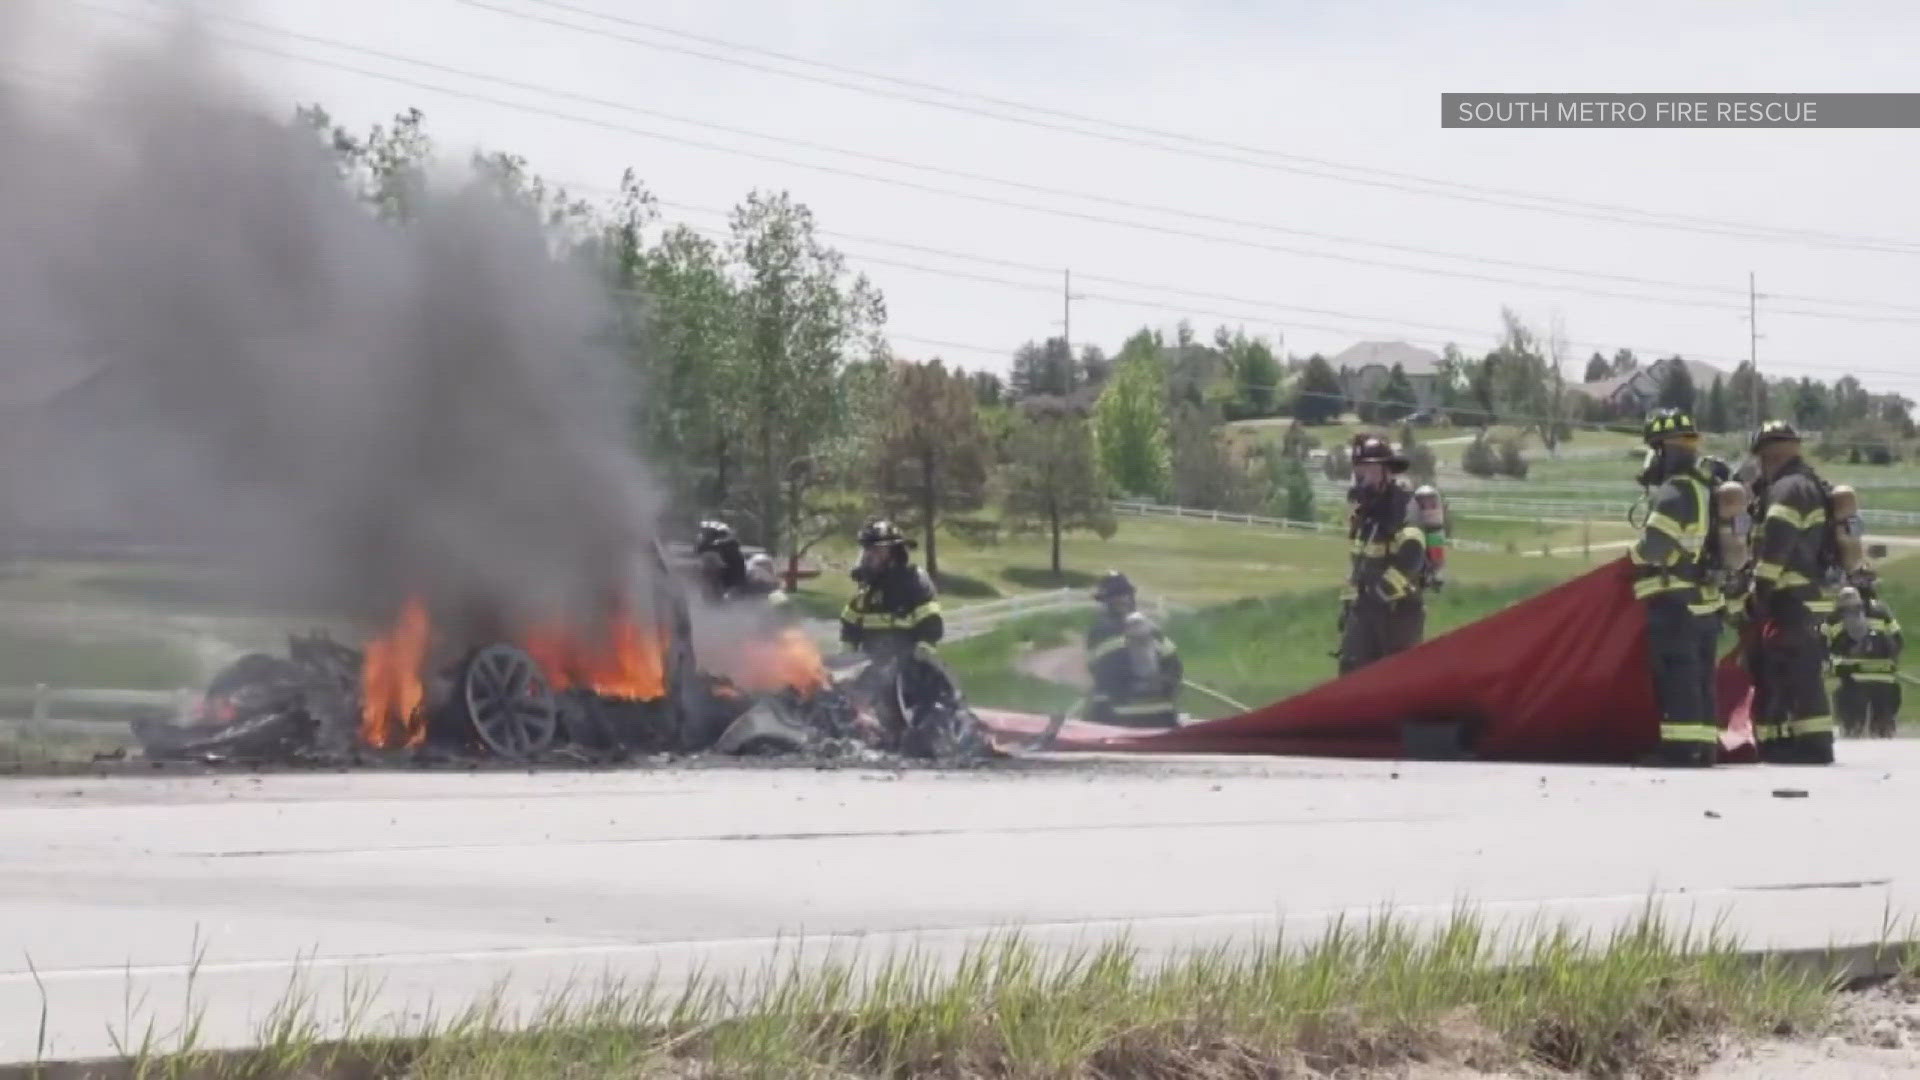 South Metro Fire Rescue said a Tesla caught fire and flames spread to nearby grass.